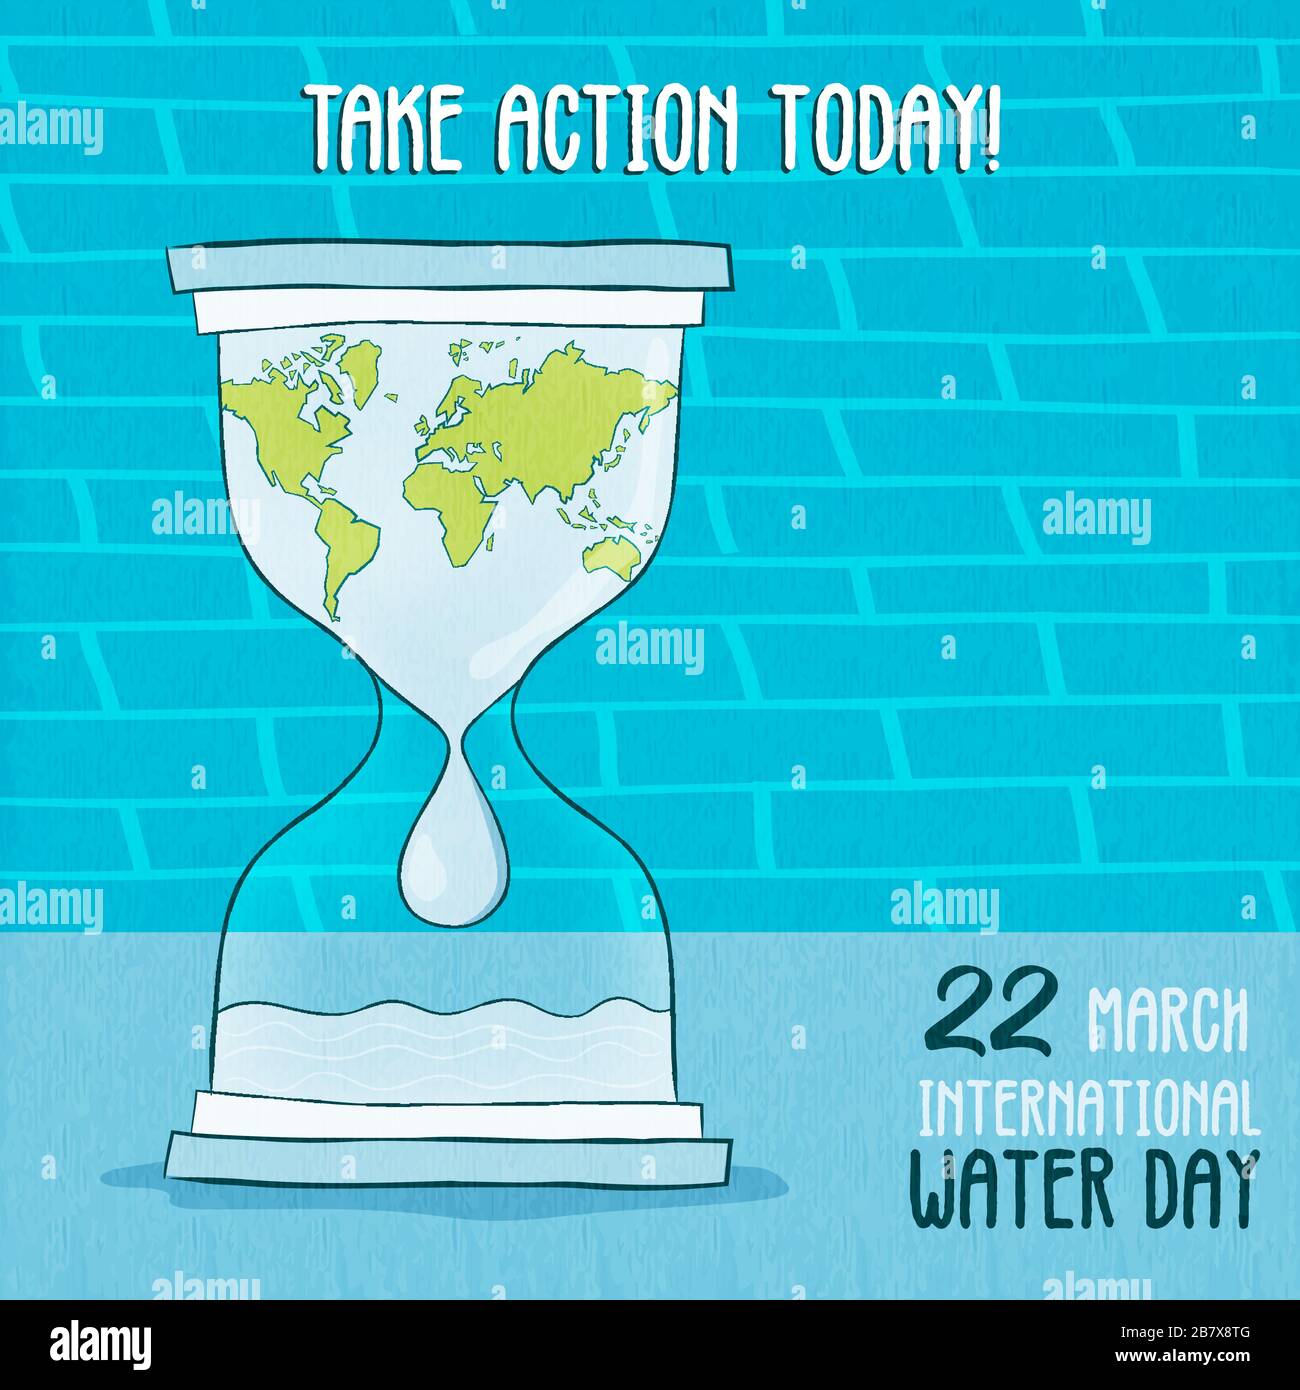 World water day greeting card for global environment help on 22 march event. Take action today quote with motivational ocean waters concept, earth car Stock Vector